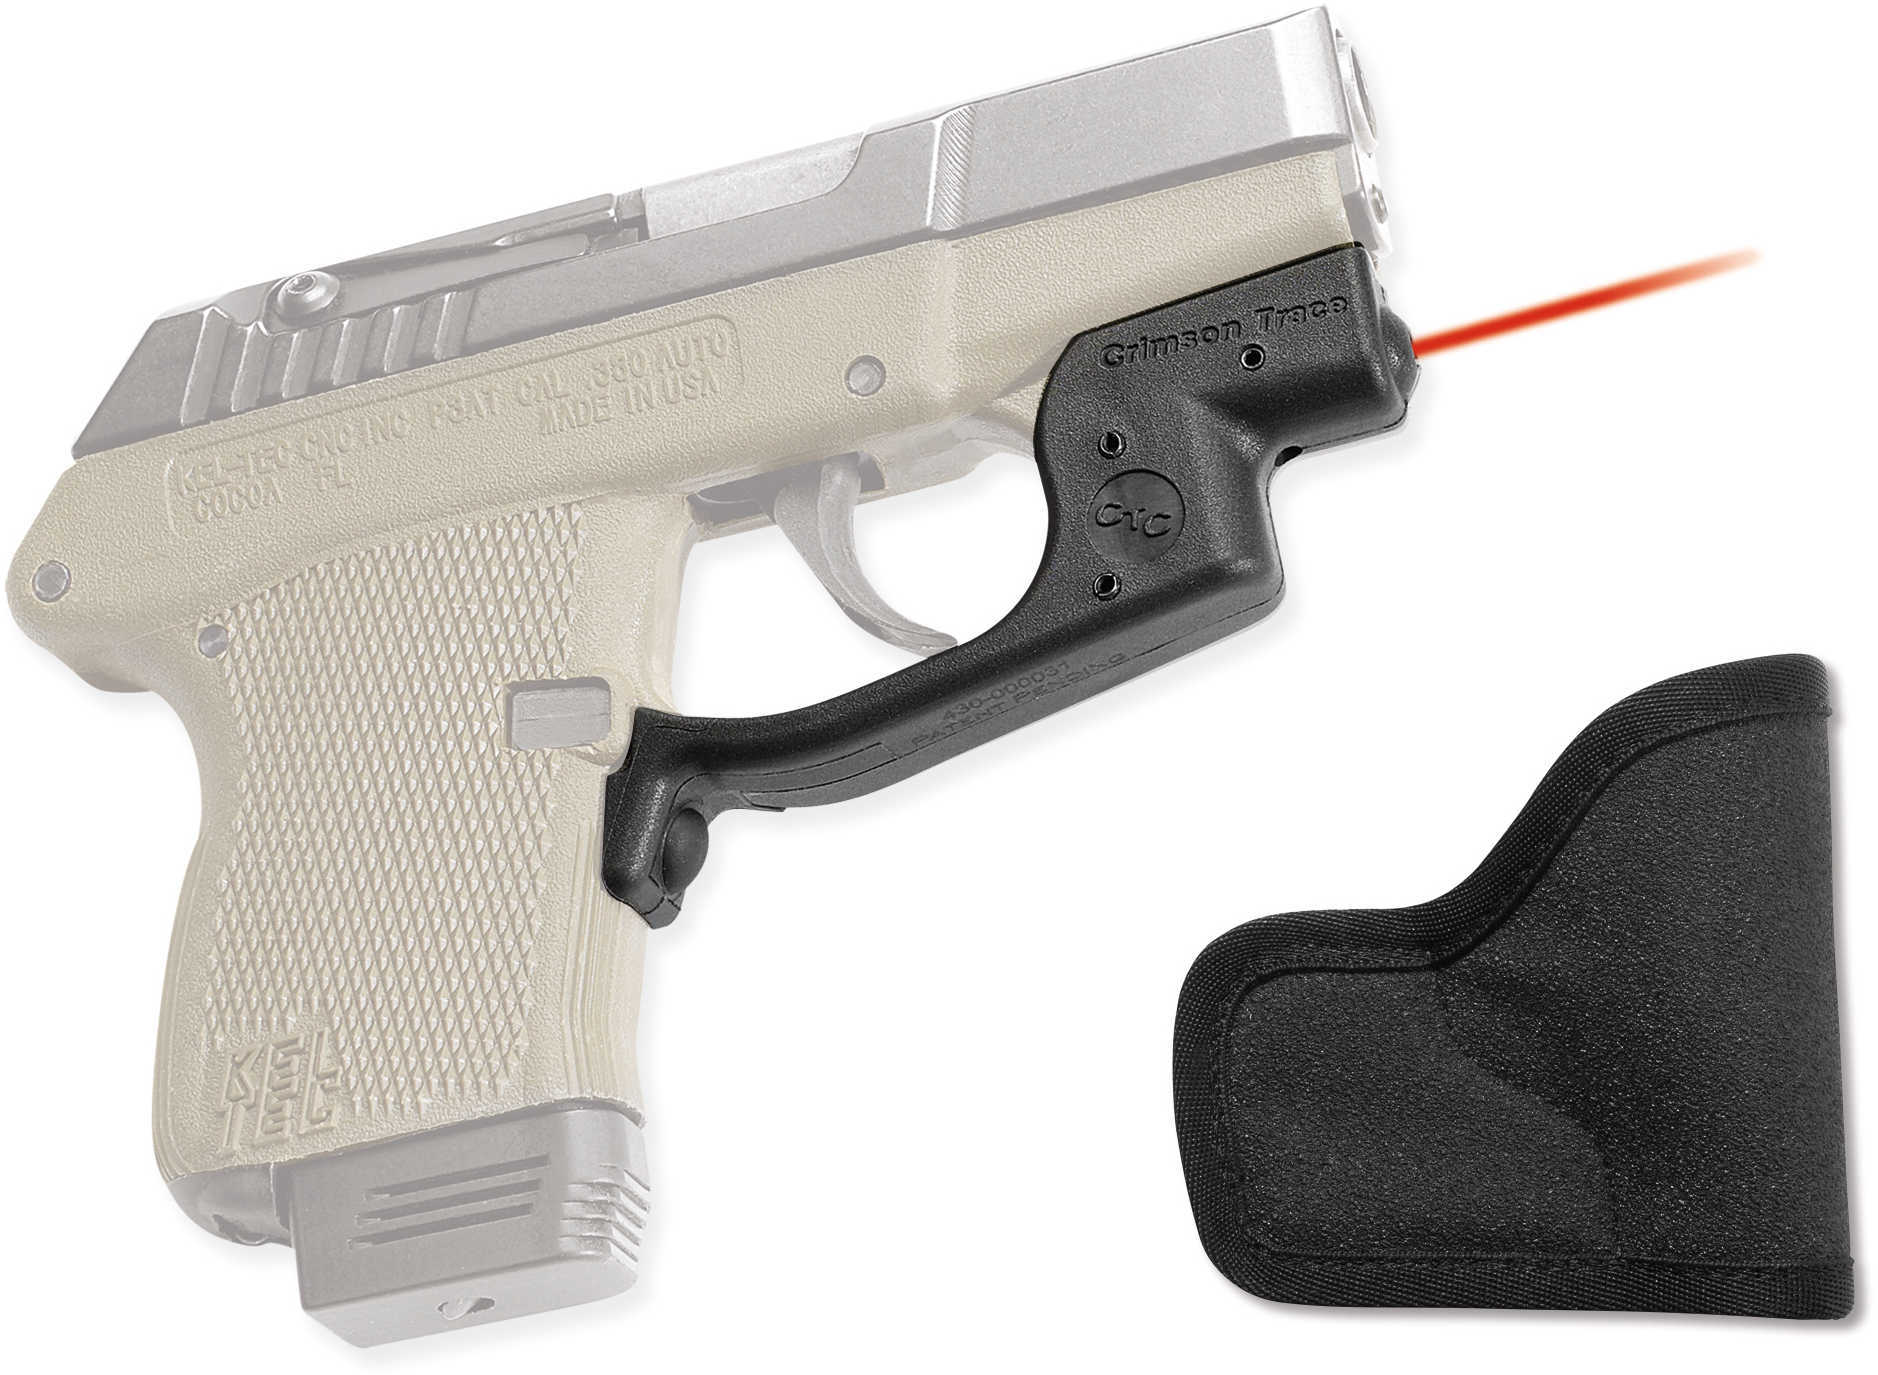 Crimson Trace Keltec P3AT,P32 Polymer,Overmold, Front Activation, includes Holster LG-430H